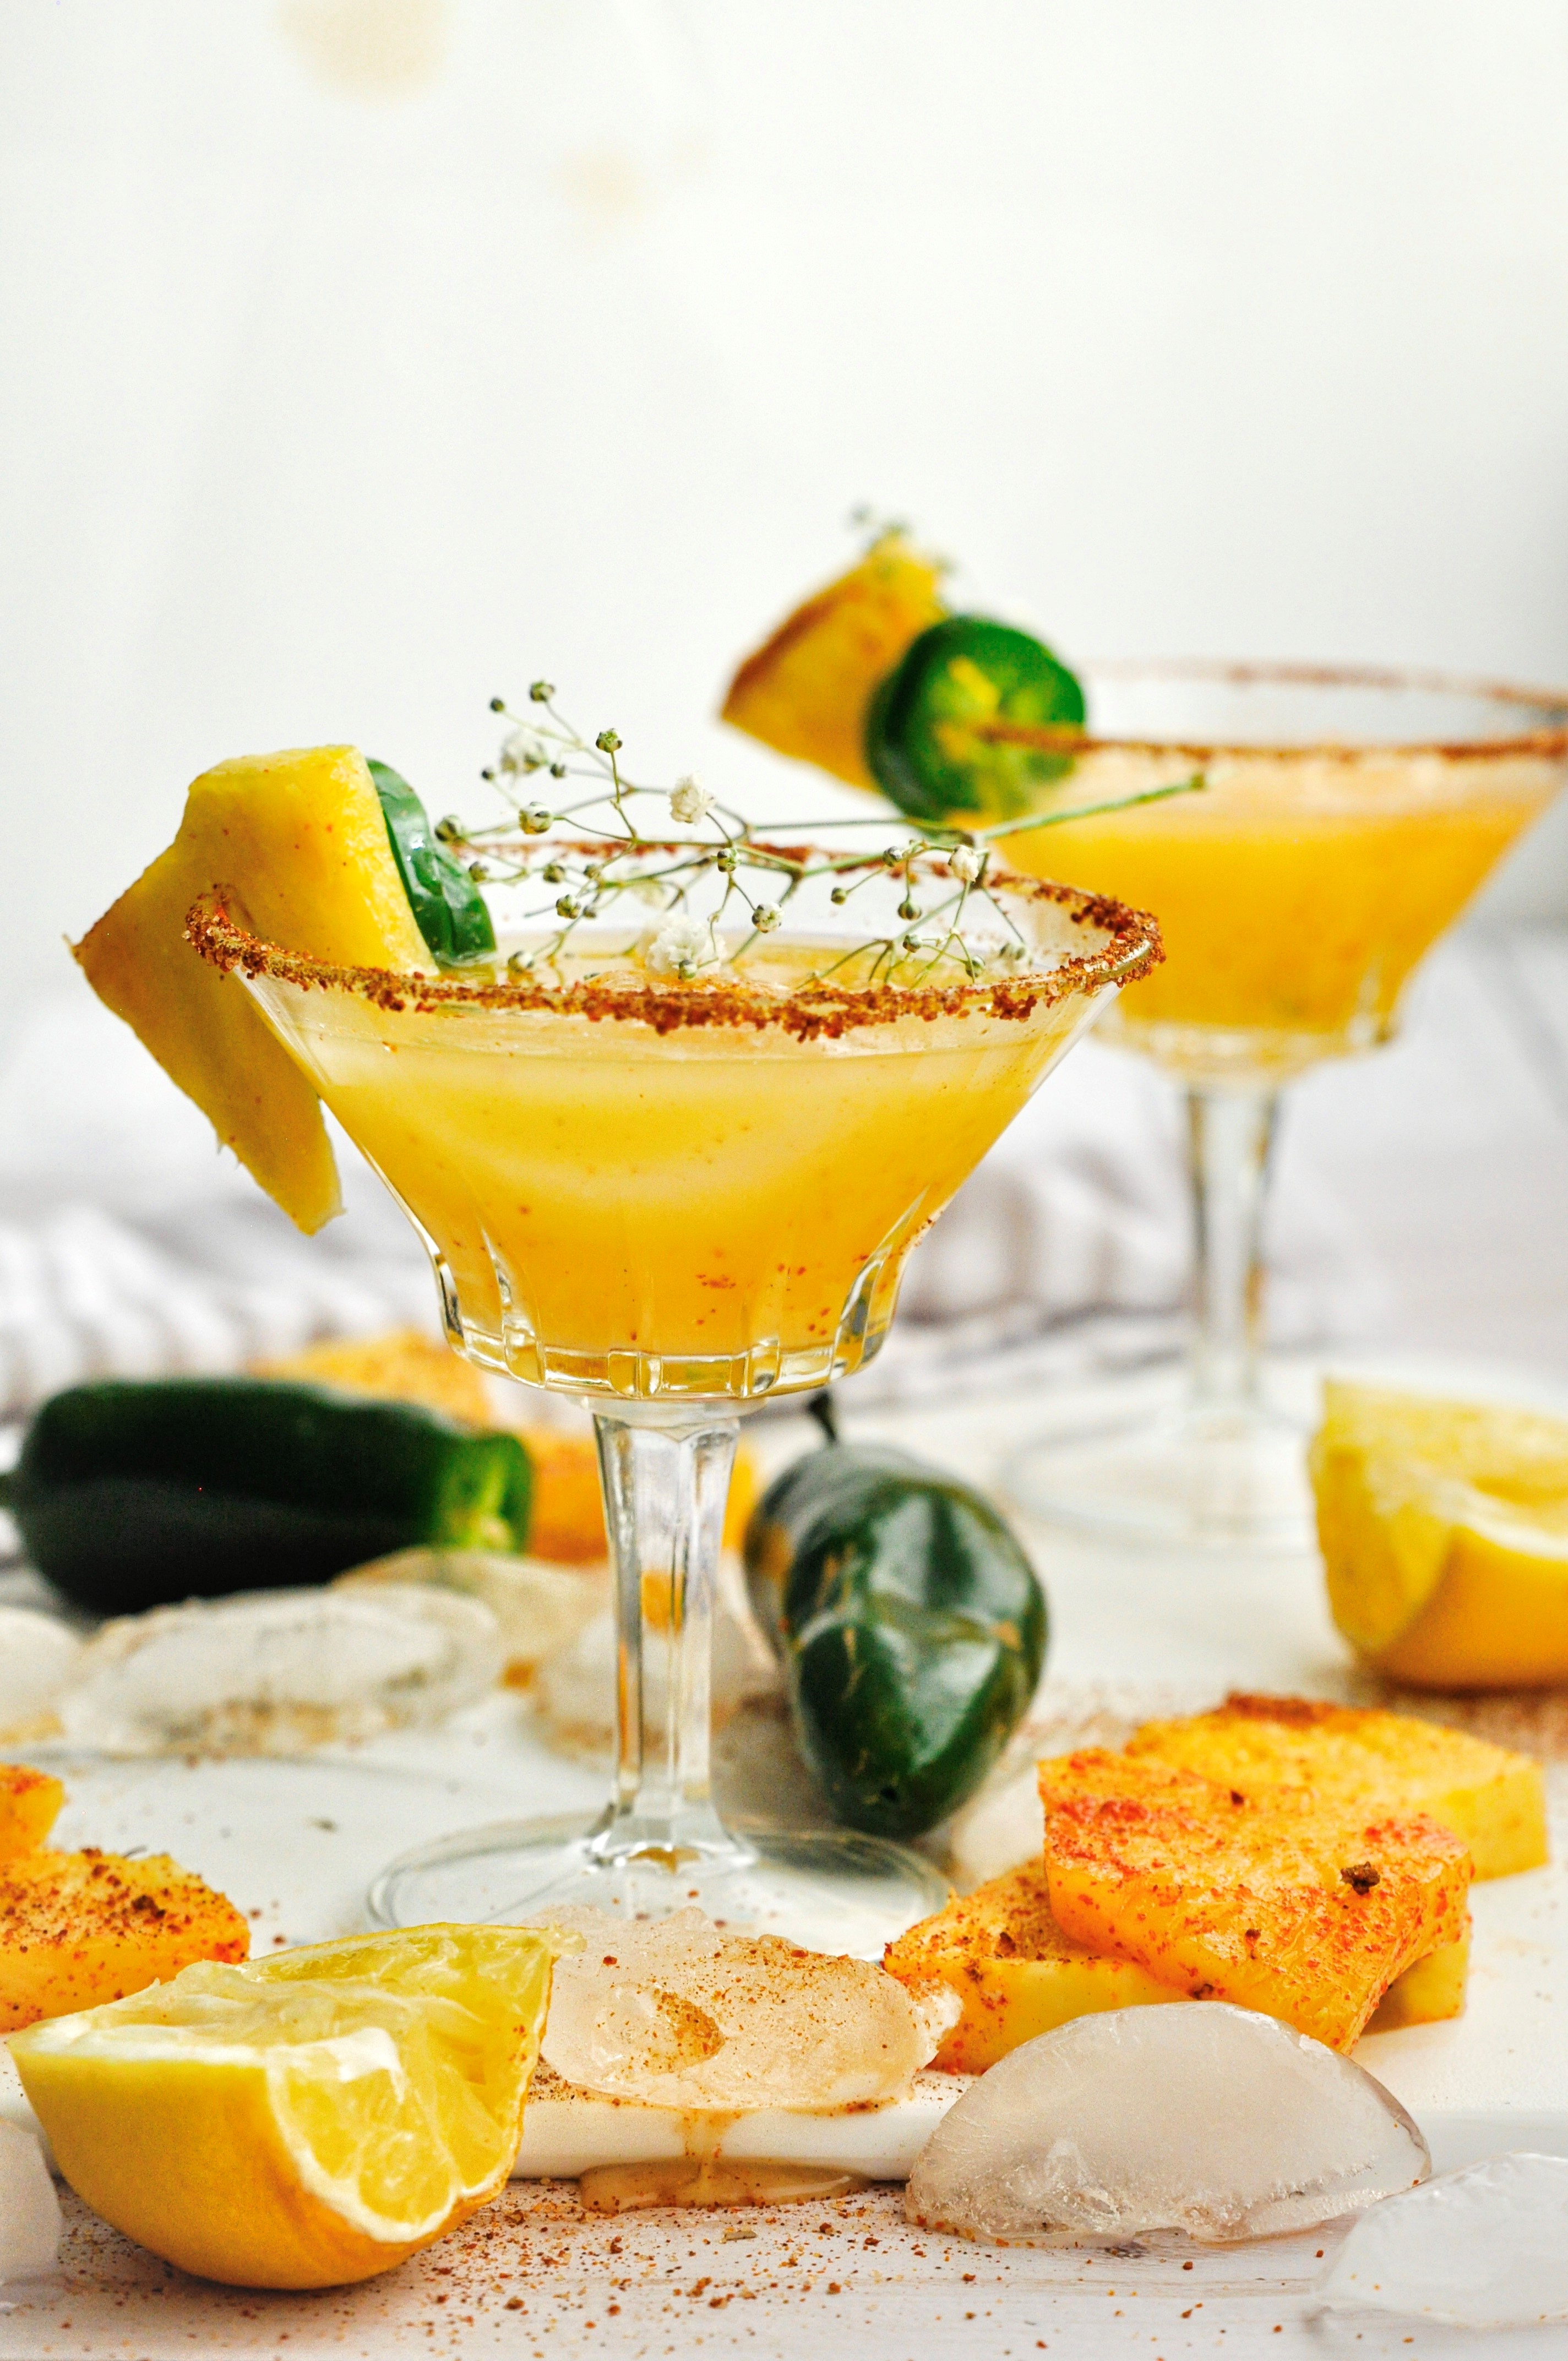 This sweet, spicy and sour grilled pineapple and jalapeno mocktail will add an island vibe to your summer pool side parties!